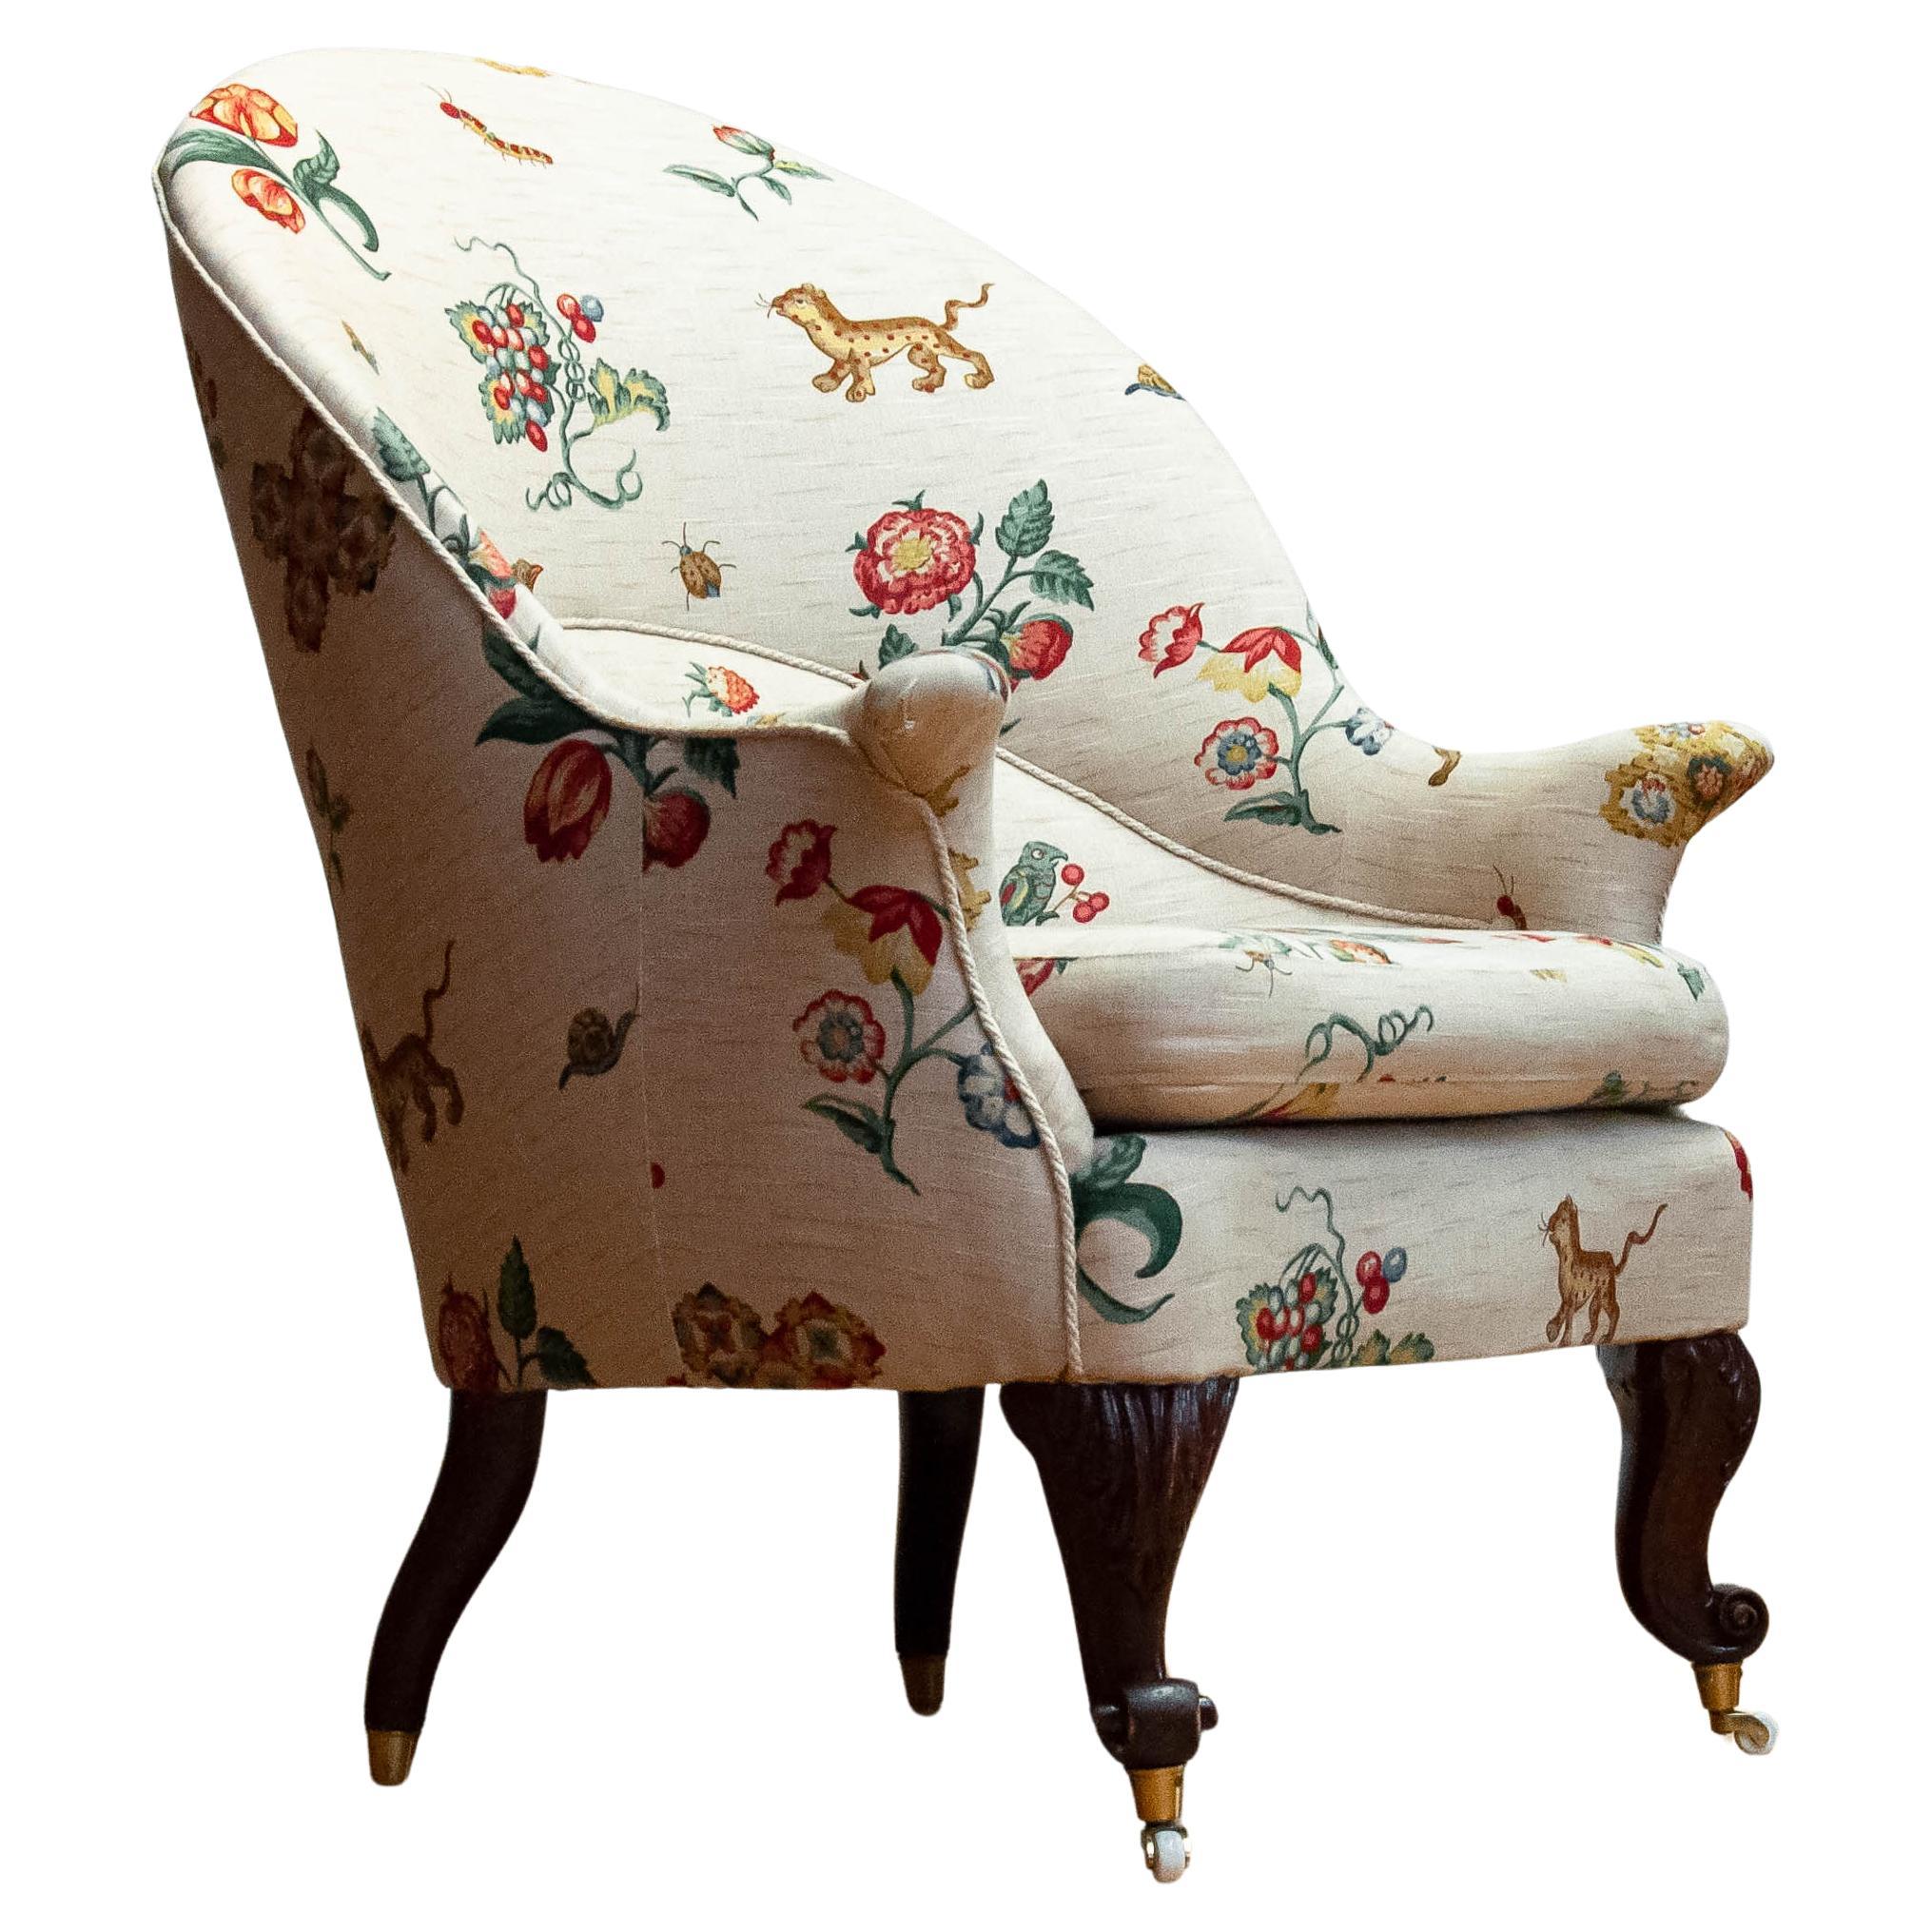 19th Century Swedish Armchair With Linen Flora And Fauna Fantasy Print Fabric For Sale